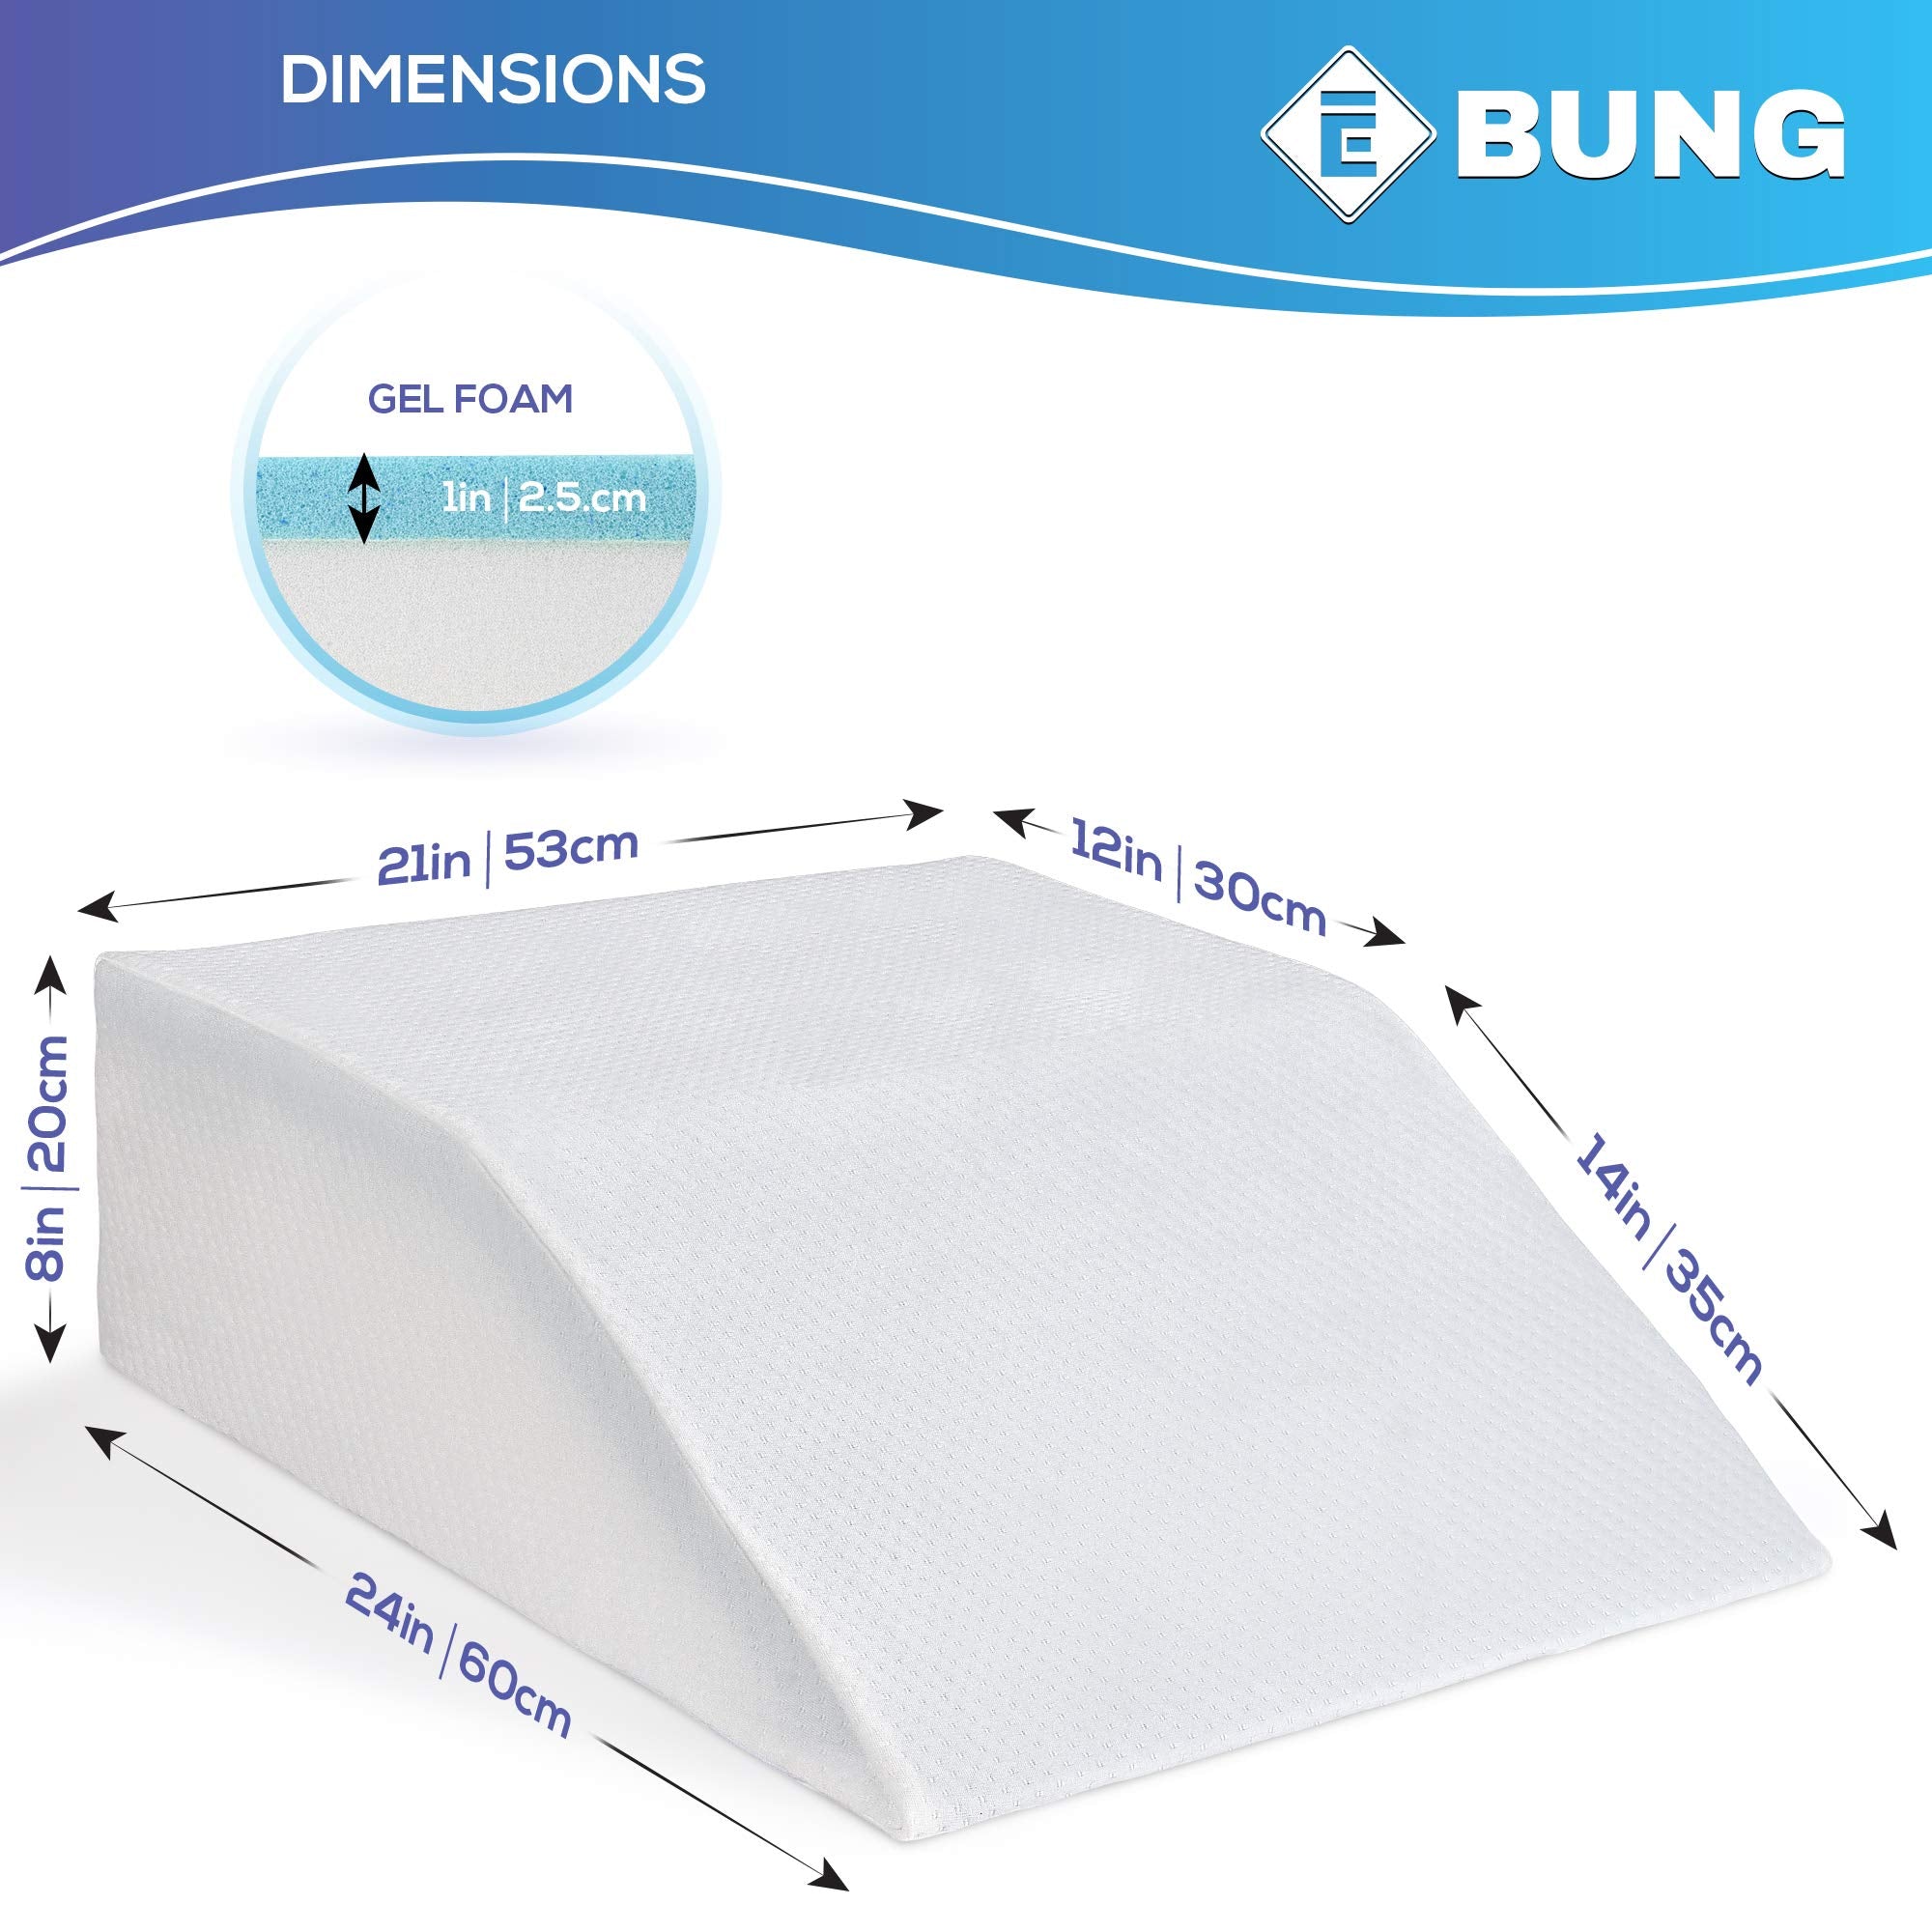 Ebung Leg Elevation Memory Foam Pillow with Removeable, Washable Cover  - Like New